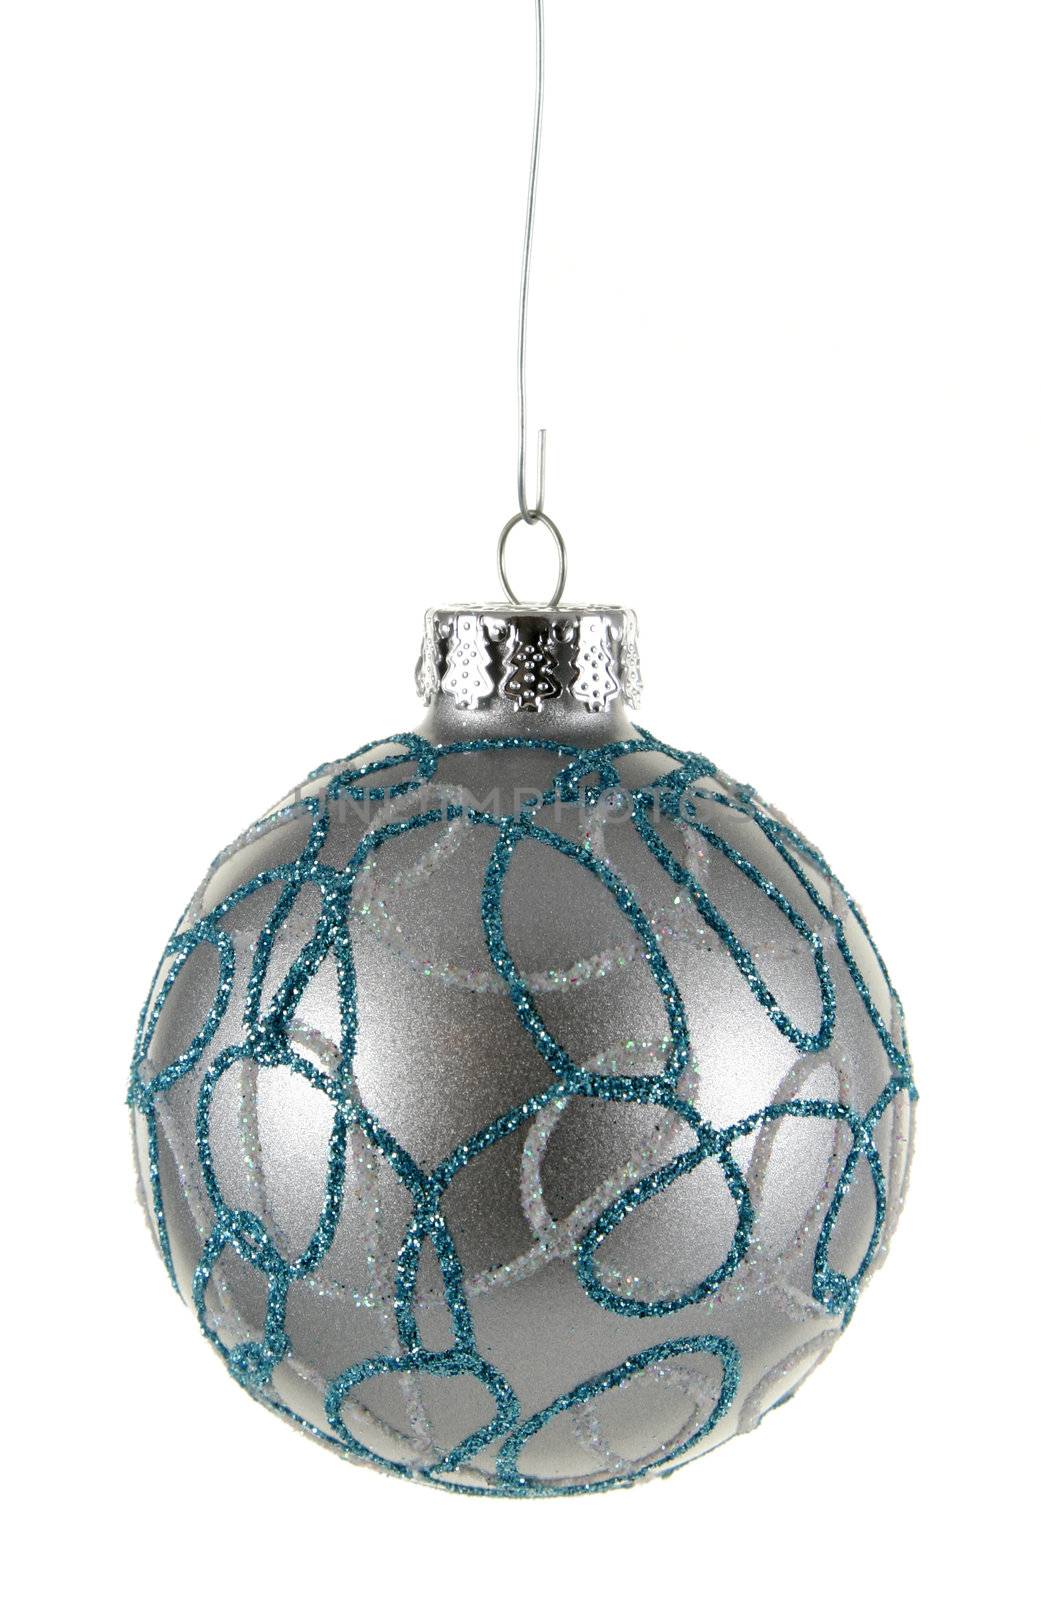 A single isolated decorated silver Christmas bauble hanging.
